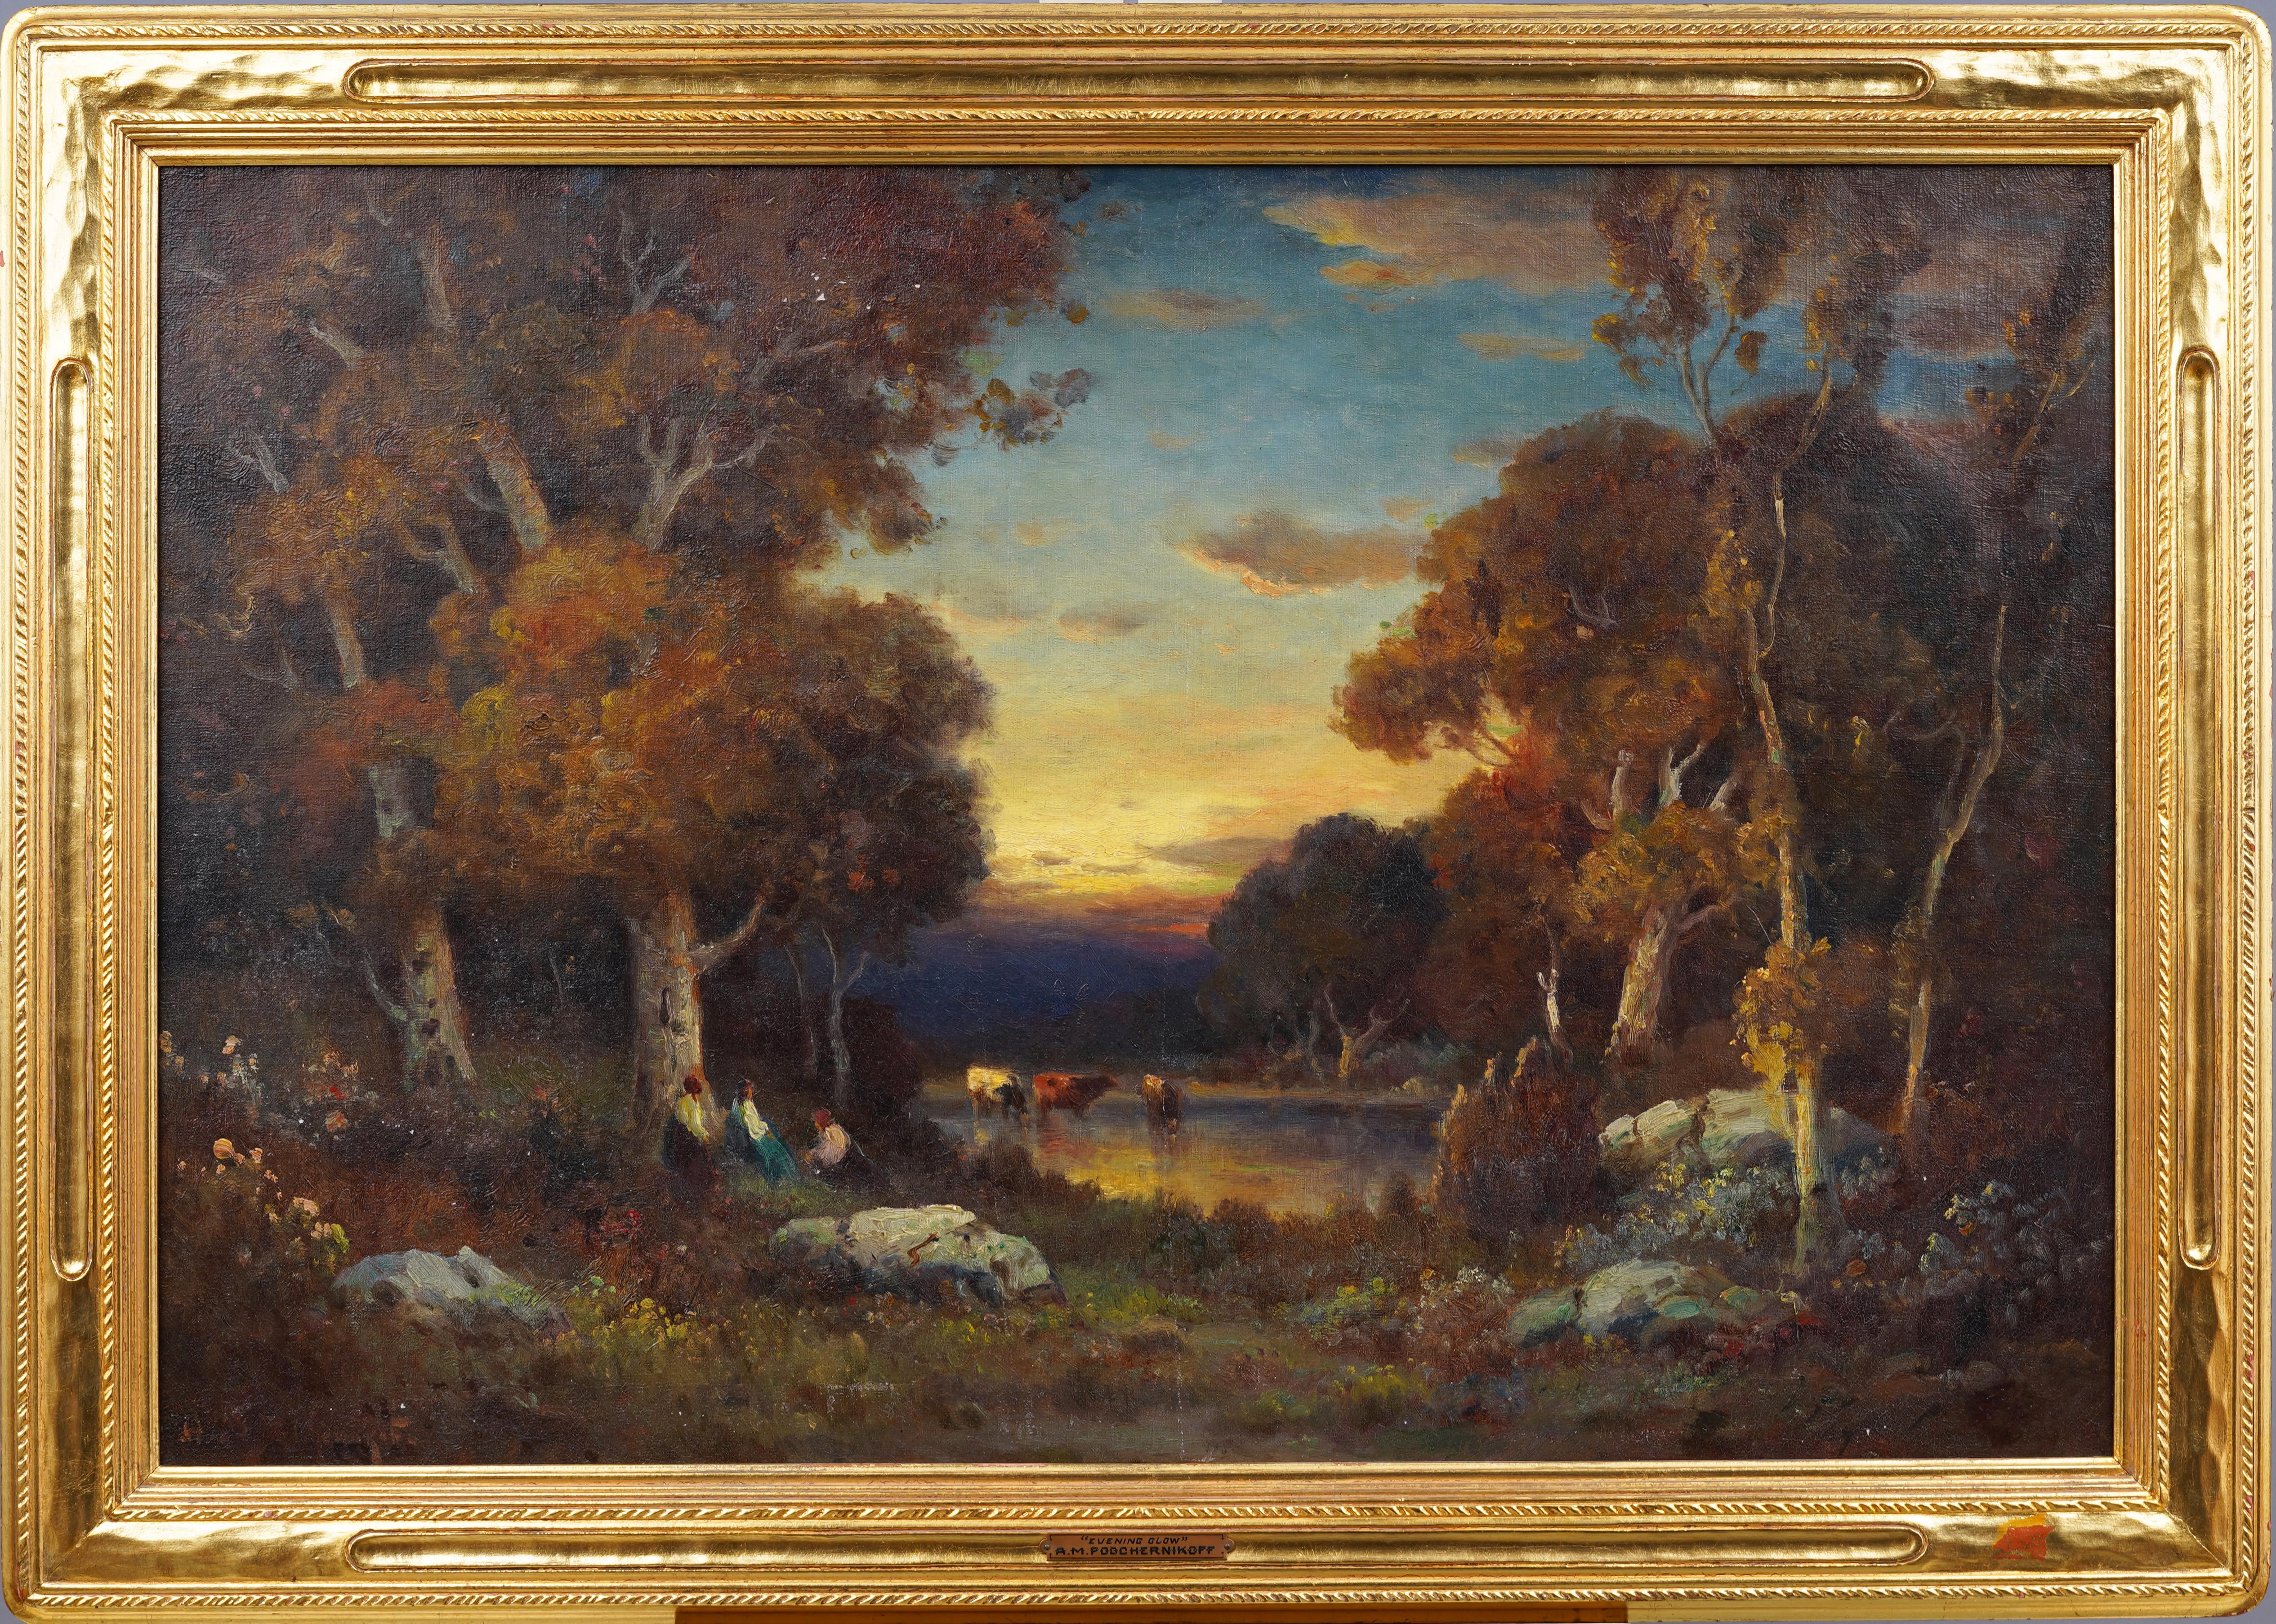 Very impressive American impressionist landscape by Alexis Matthew Podchernikoff (1886 - 1933) .  Great colors and nicely painted.  Housed in a period giltwood frame.  Oil on canvas.  Signed. Artist Bio:  Alexis Matthew Podchernikoff was born in